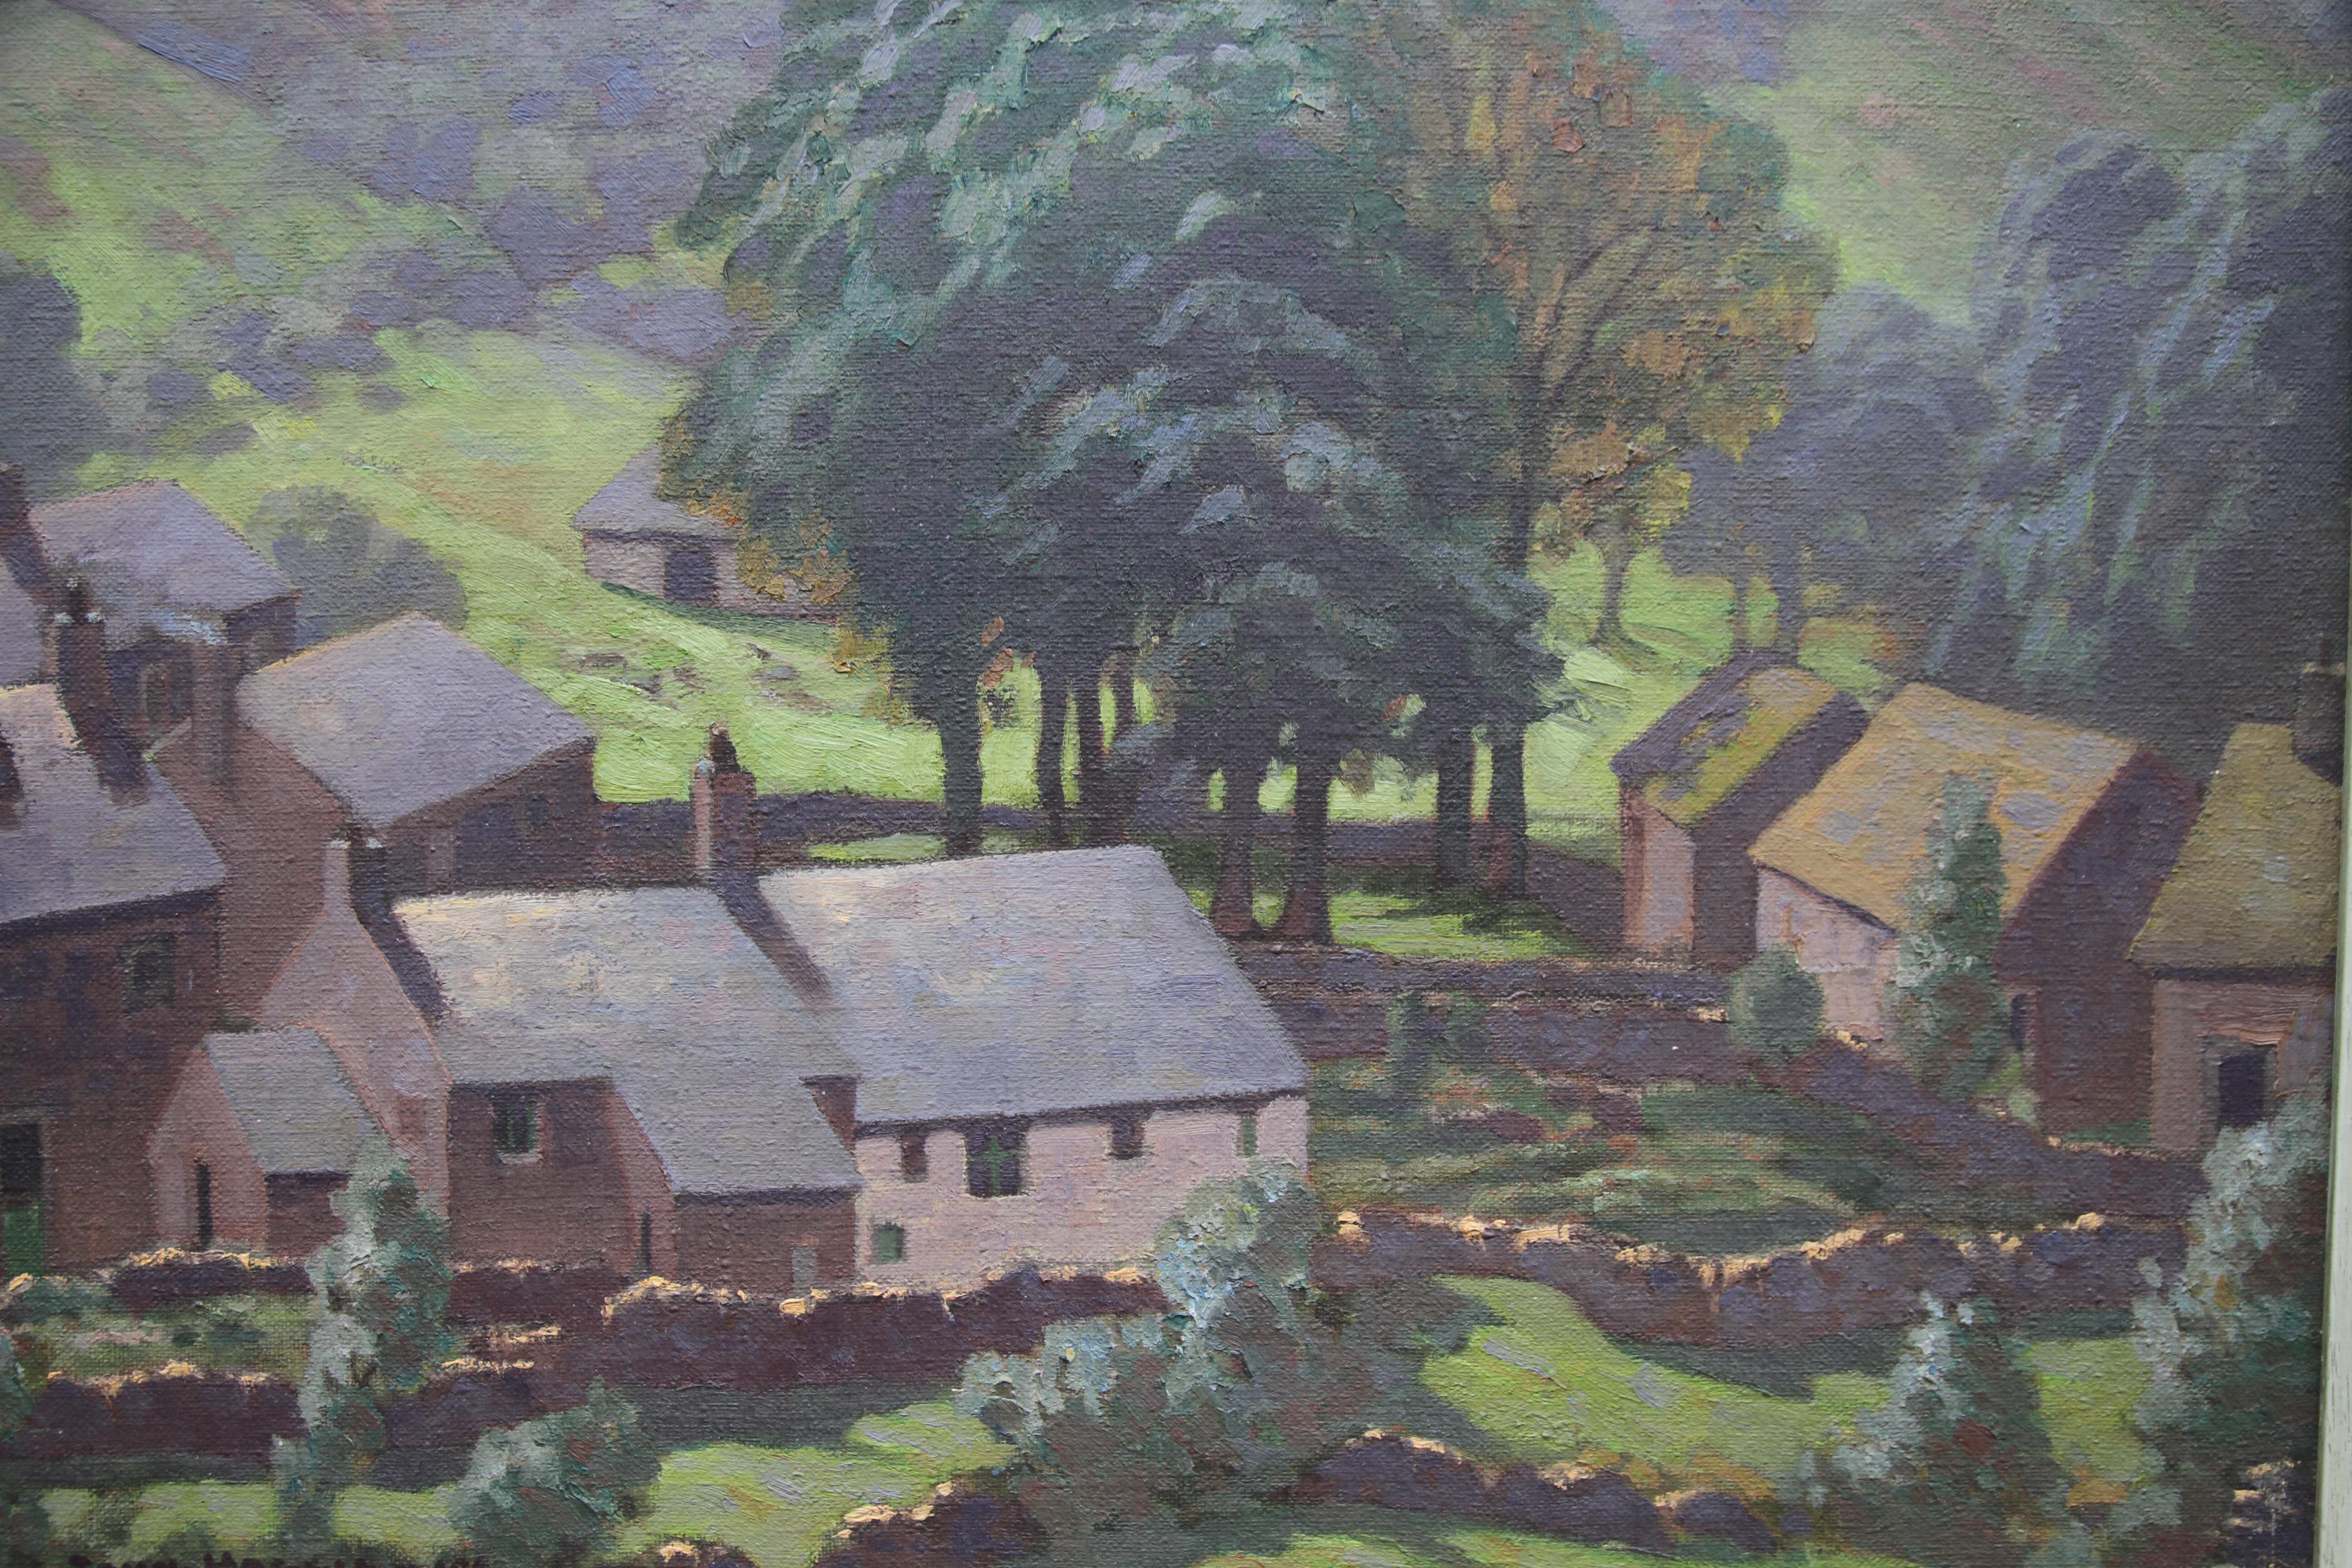 A superb post impressionist oil painting by British artist John Haggis. The work depicts a view of the lake district, looking down  into a valley, onto a farm, out buildings, dry stone walls, trees and fields. Even though one can't see the sky, one